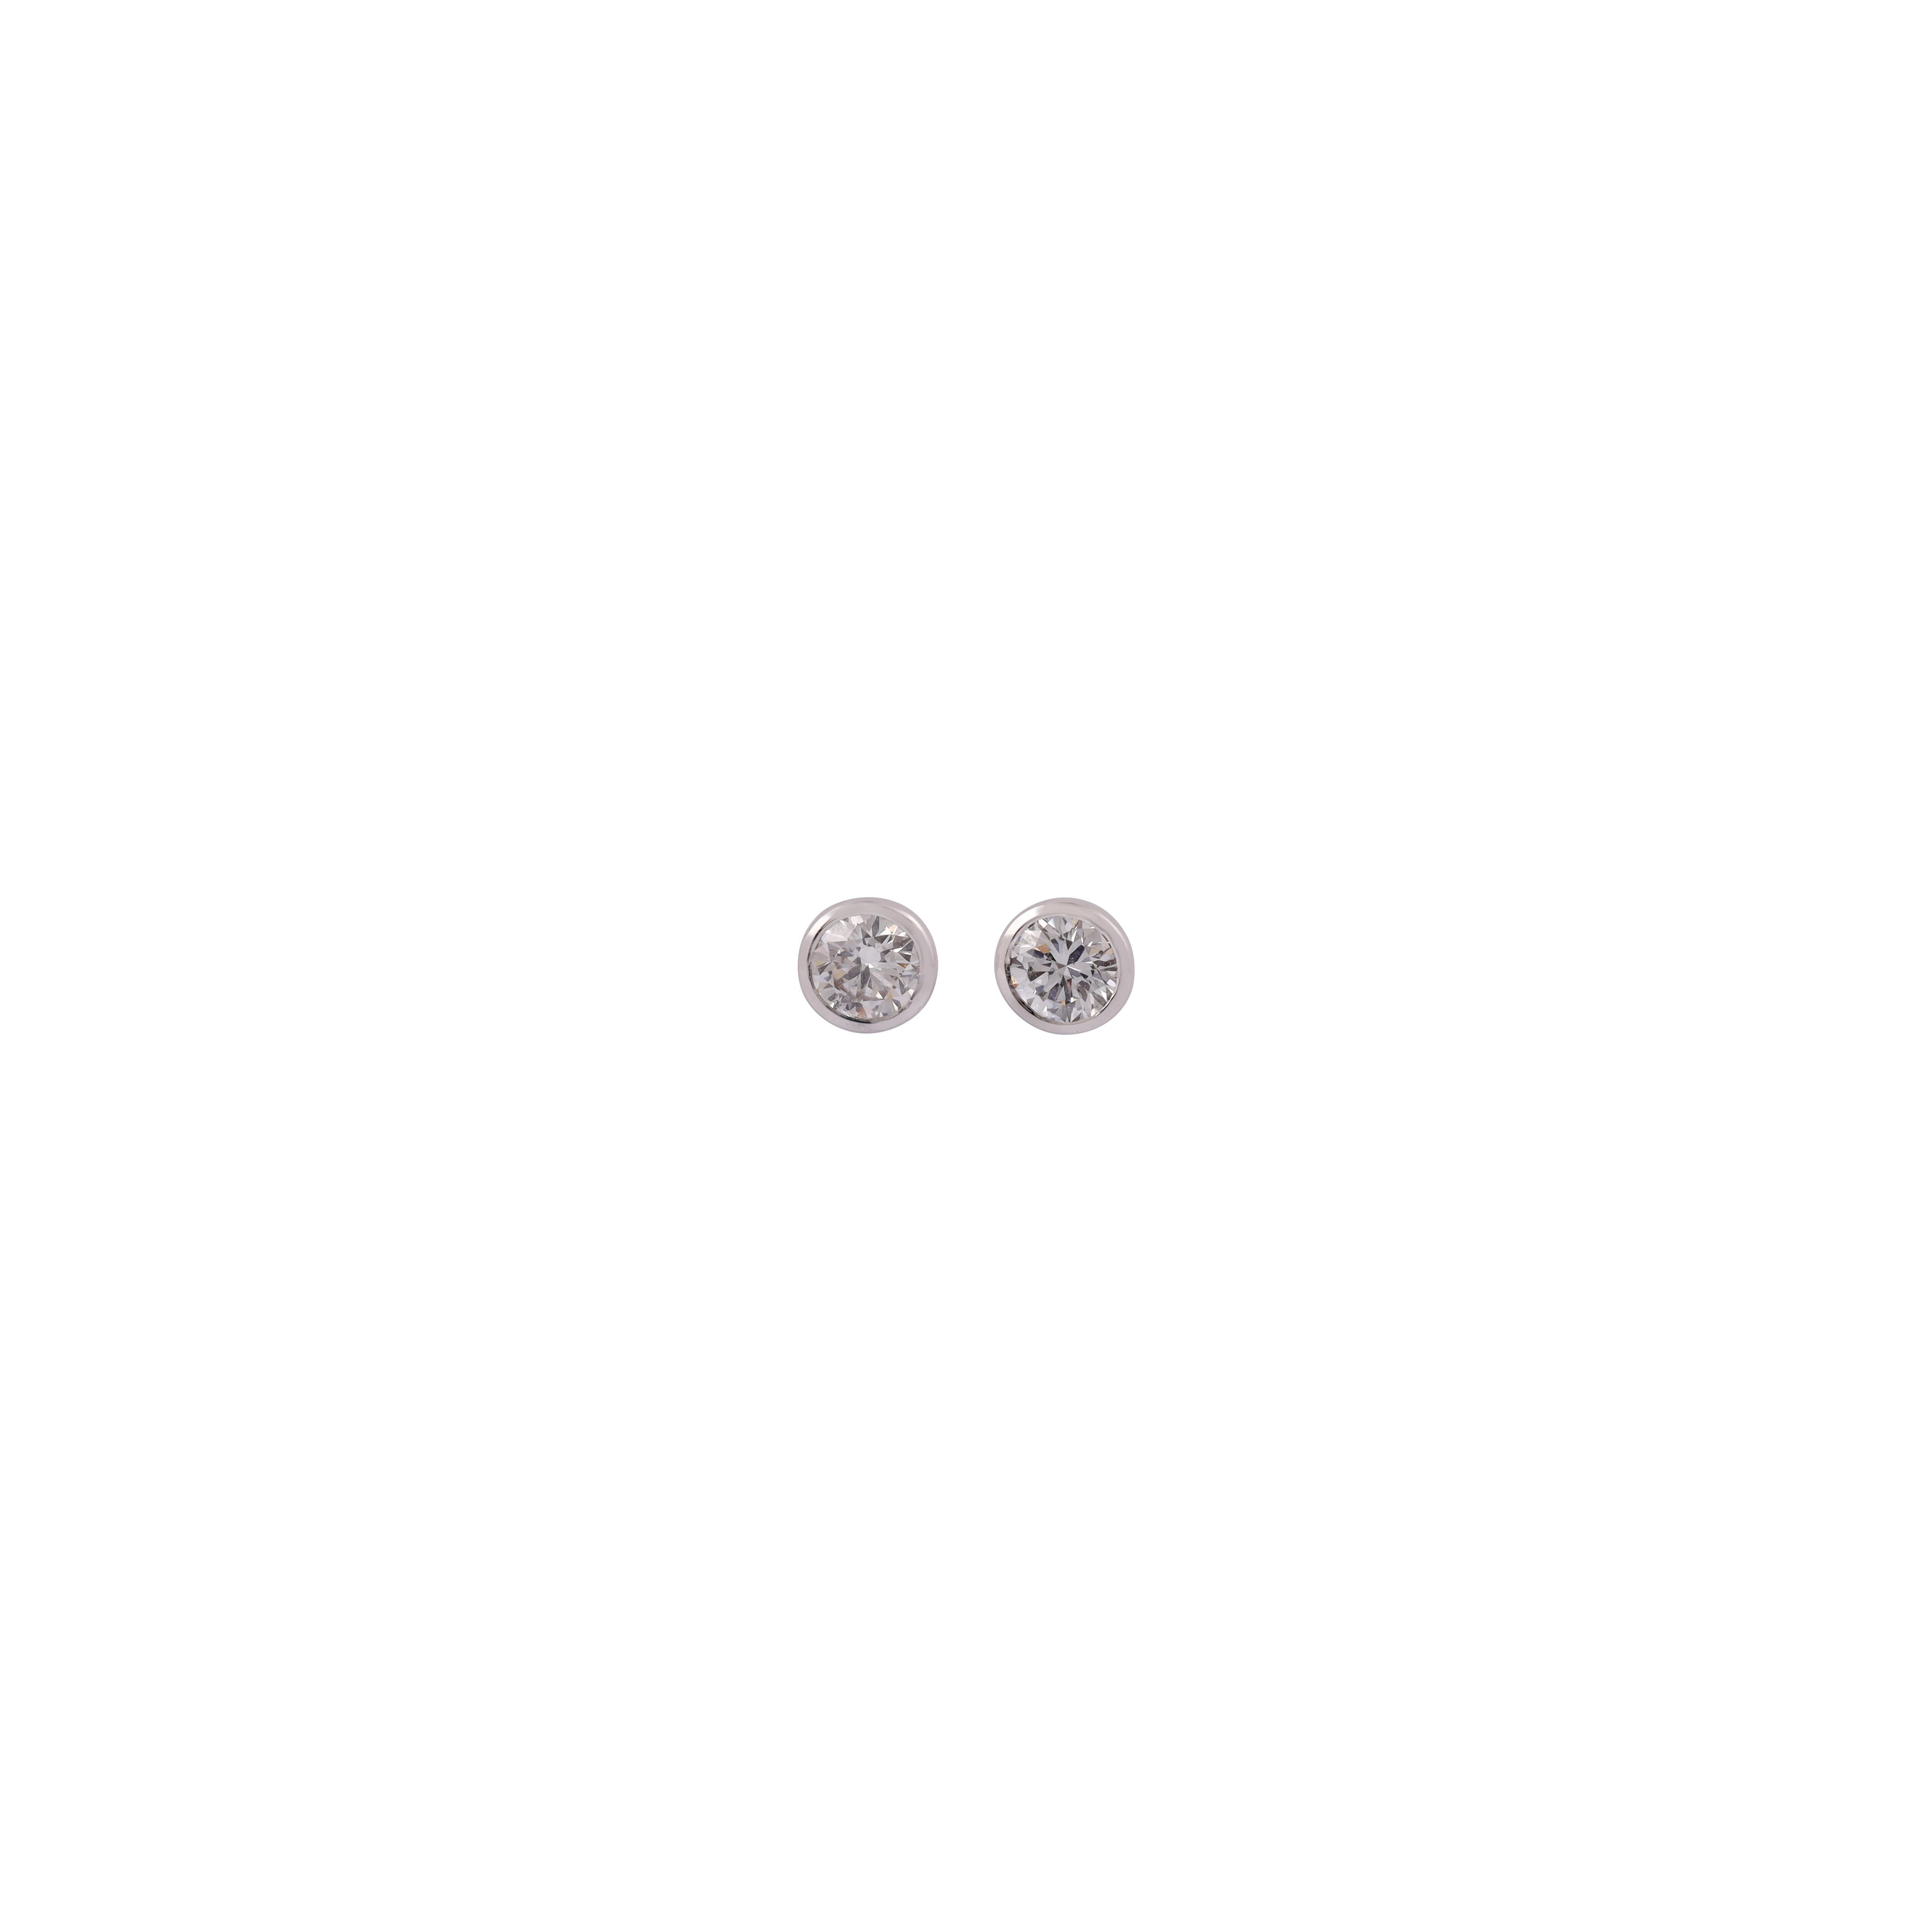 Diamond stud earrings weighing 0.47 Carats, in 18 Karat white Gold close  Setting.
Eye Clean, will not be able to tell on the Ear.
Great Pair for the Price too!
Gold - 1.78gm

More Diamond Studs Available